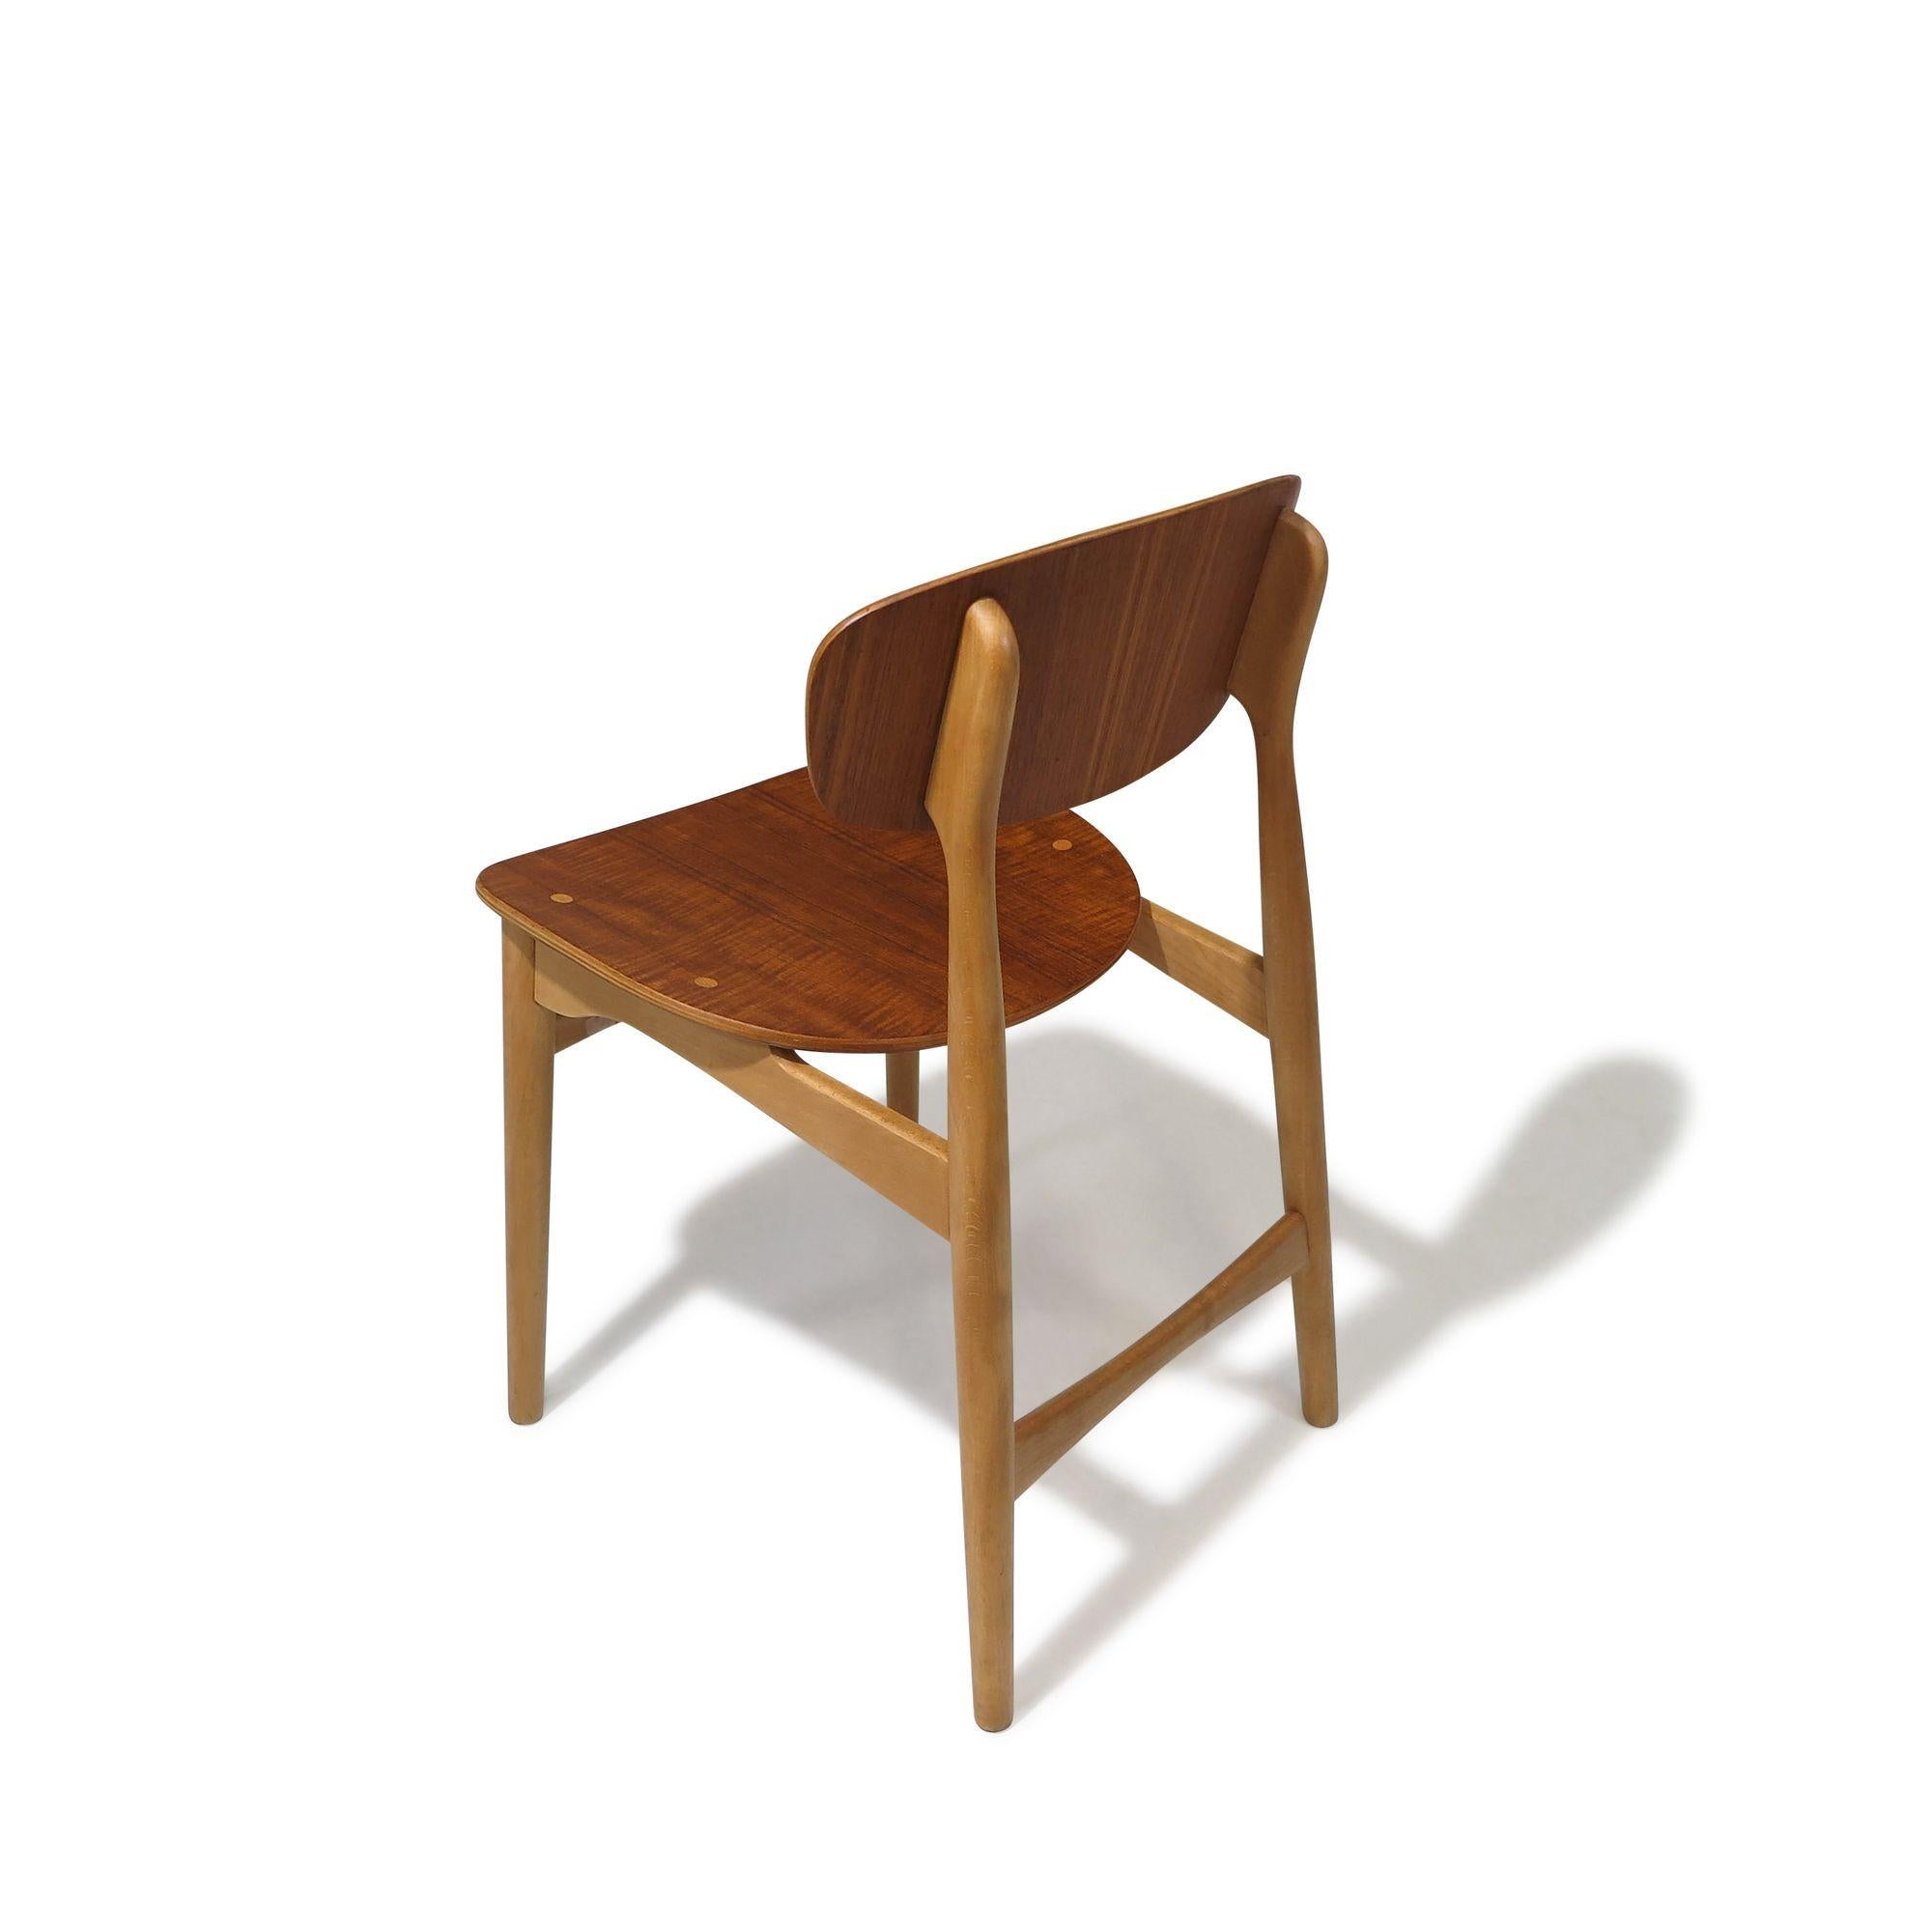 Eight Jens Hjorth Beech and Teak Mid-century Danish Dining Chairs For Sale 2